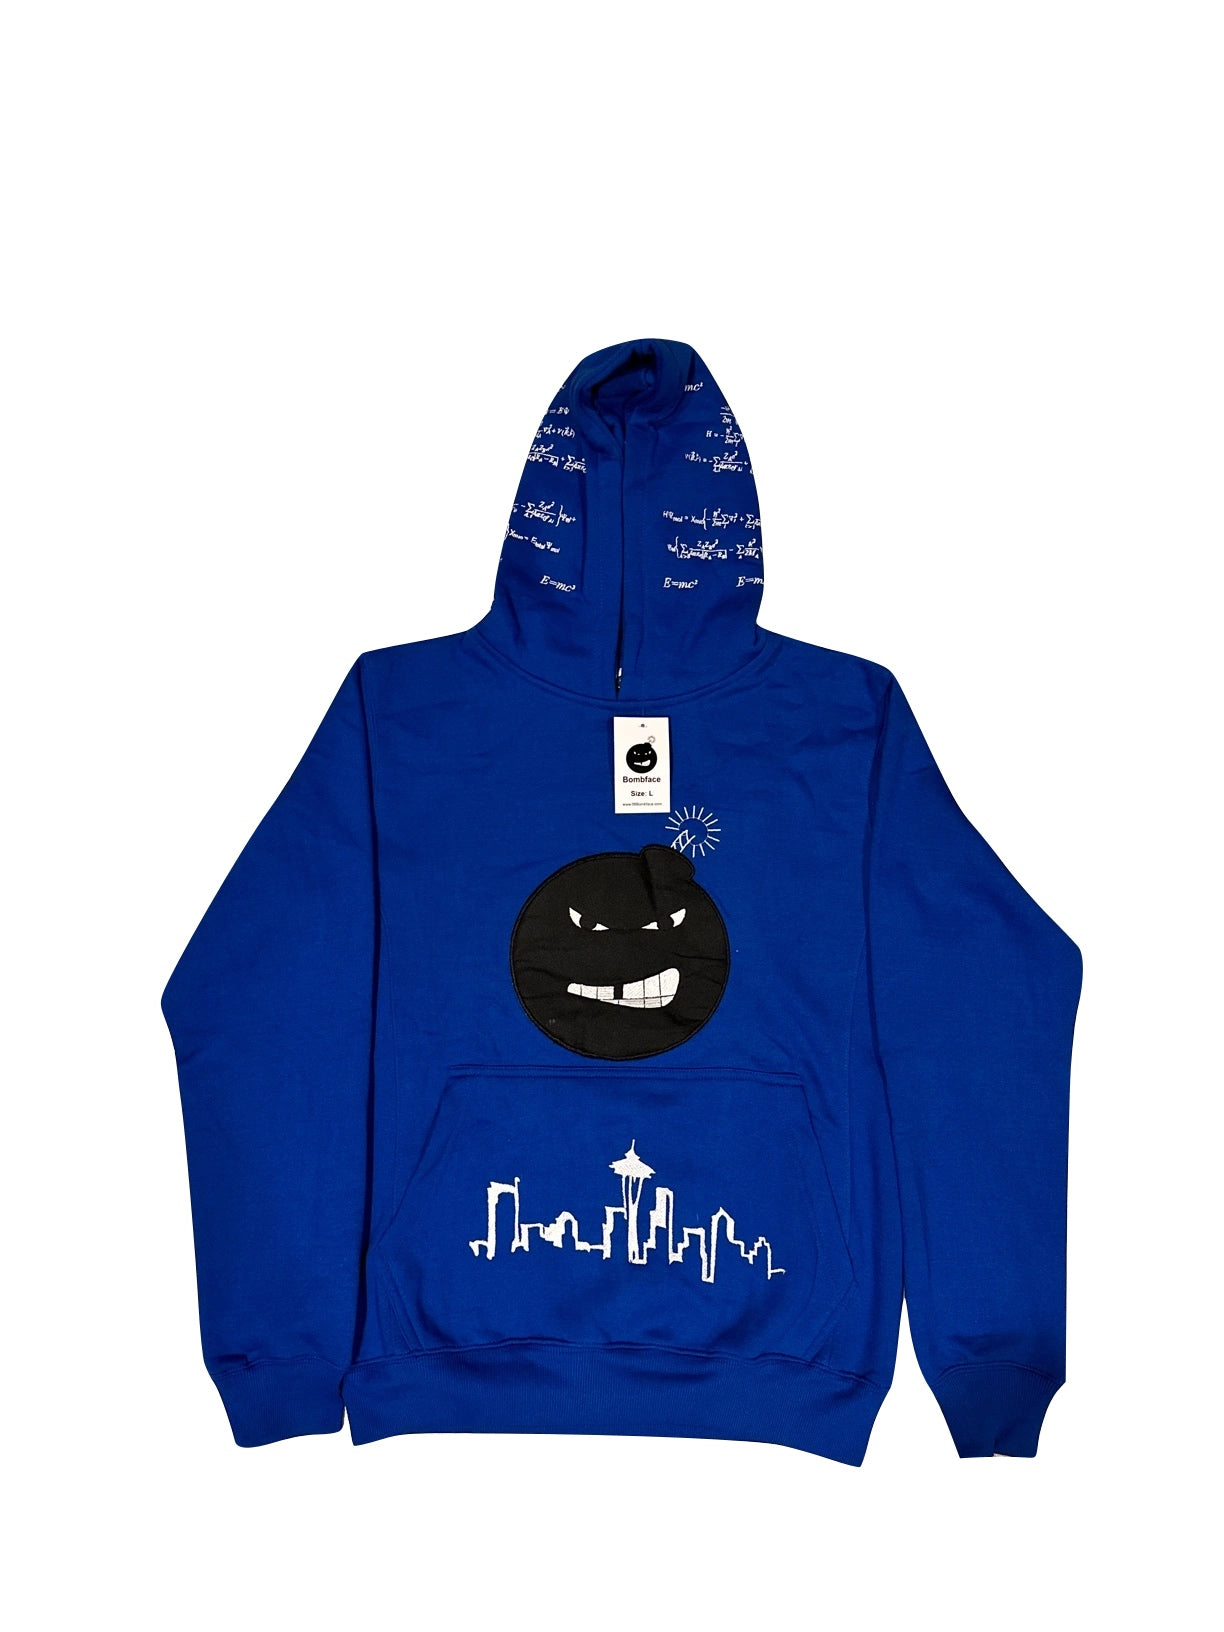 Royal Blue hoodie with the Seattle Skyline on the hoodie pocket. This hoodie is dedicated to the Seattle life and style 